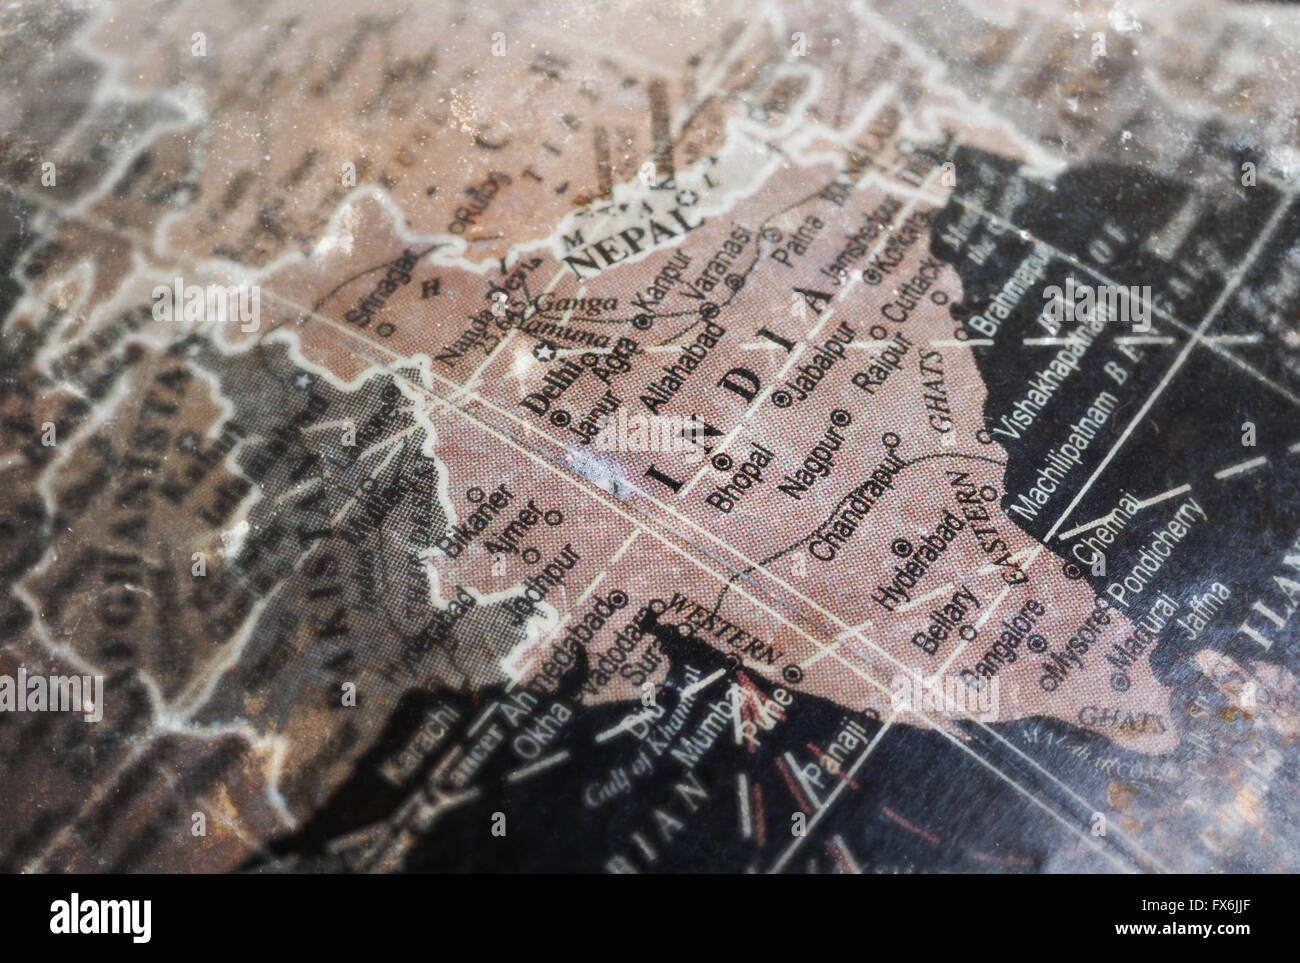 India map on vintage crack paper background, selective focus Stock Photo